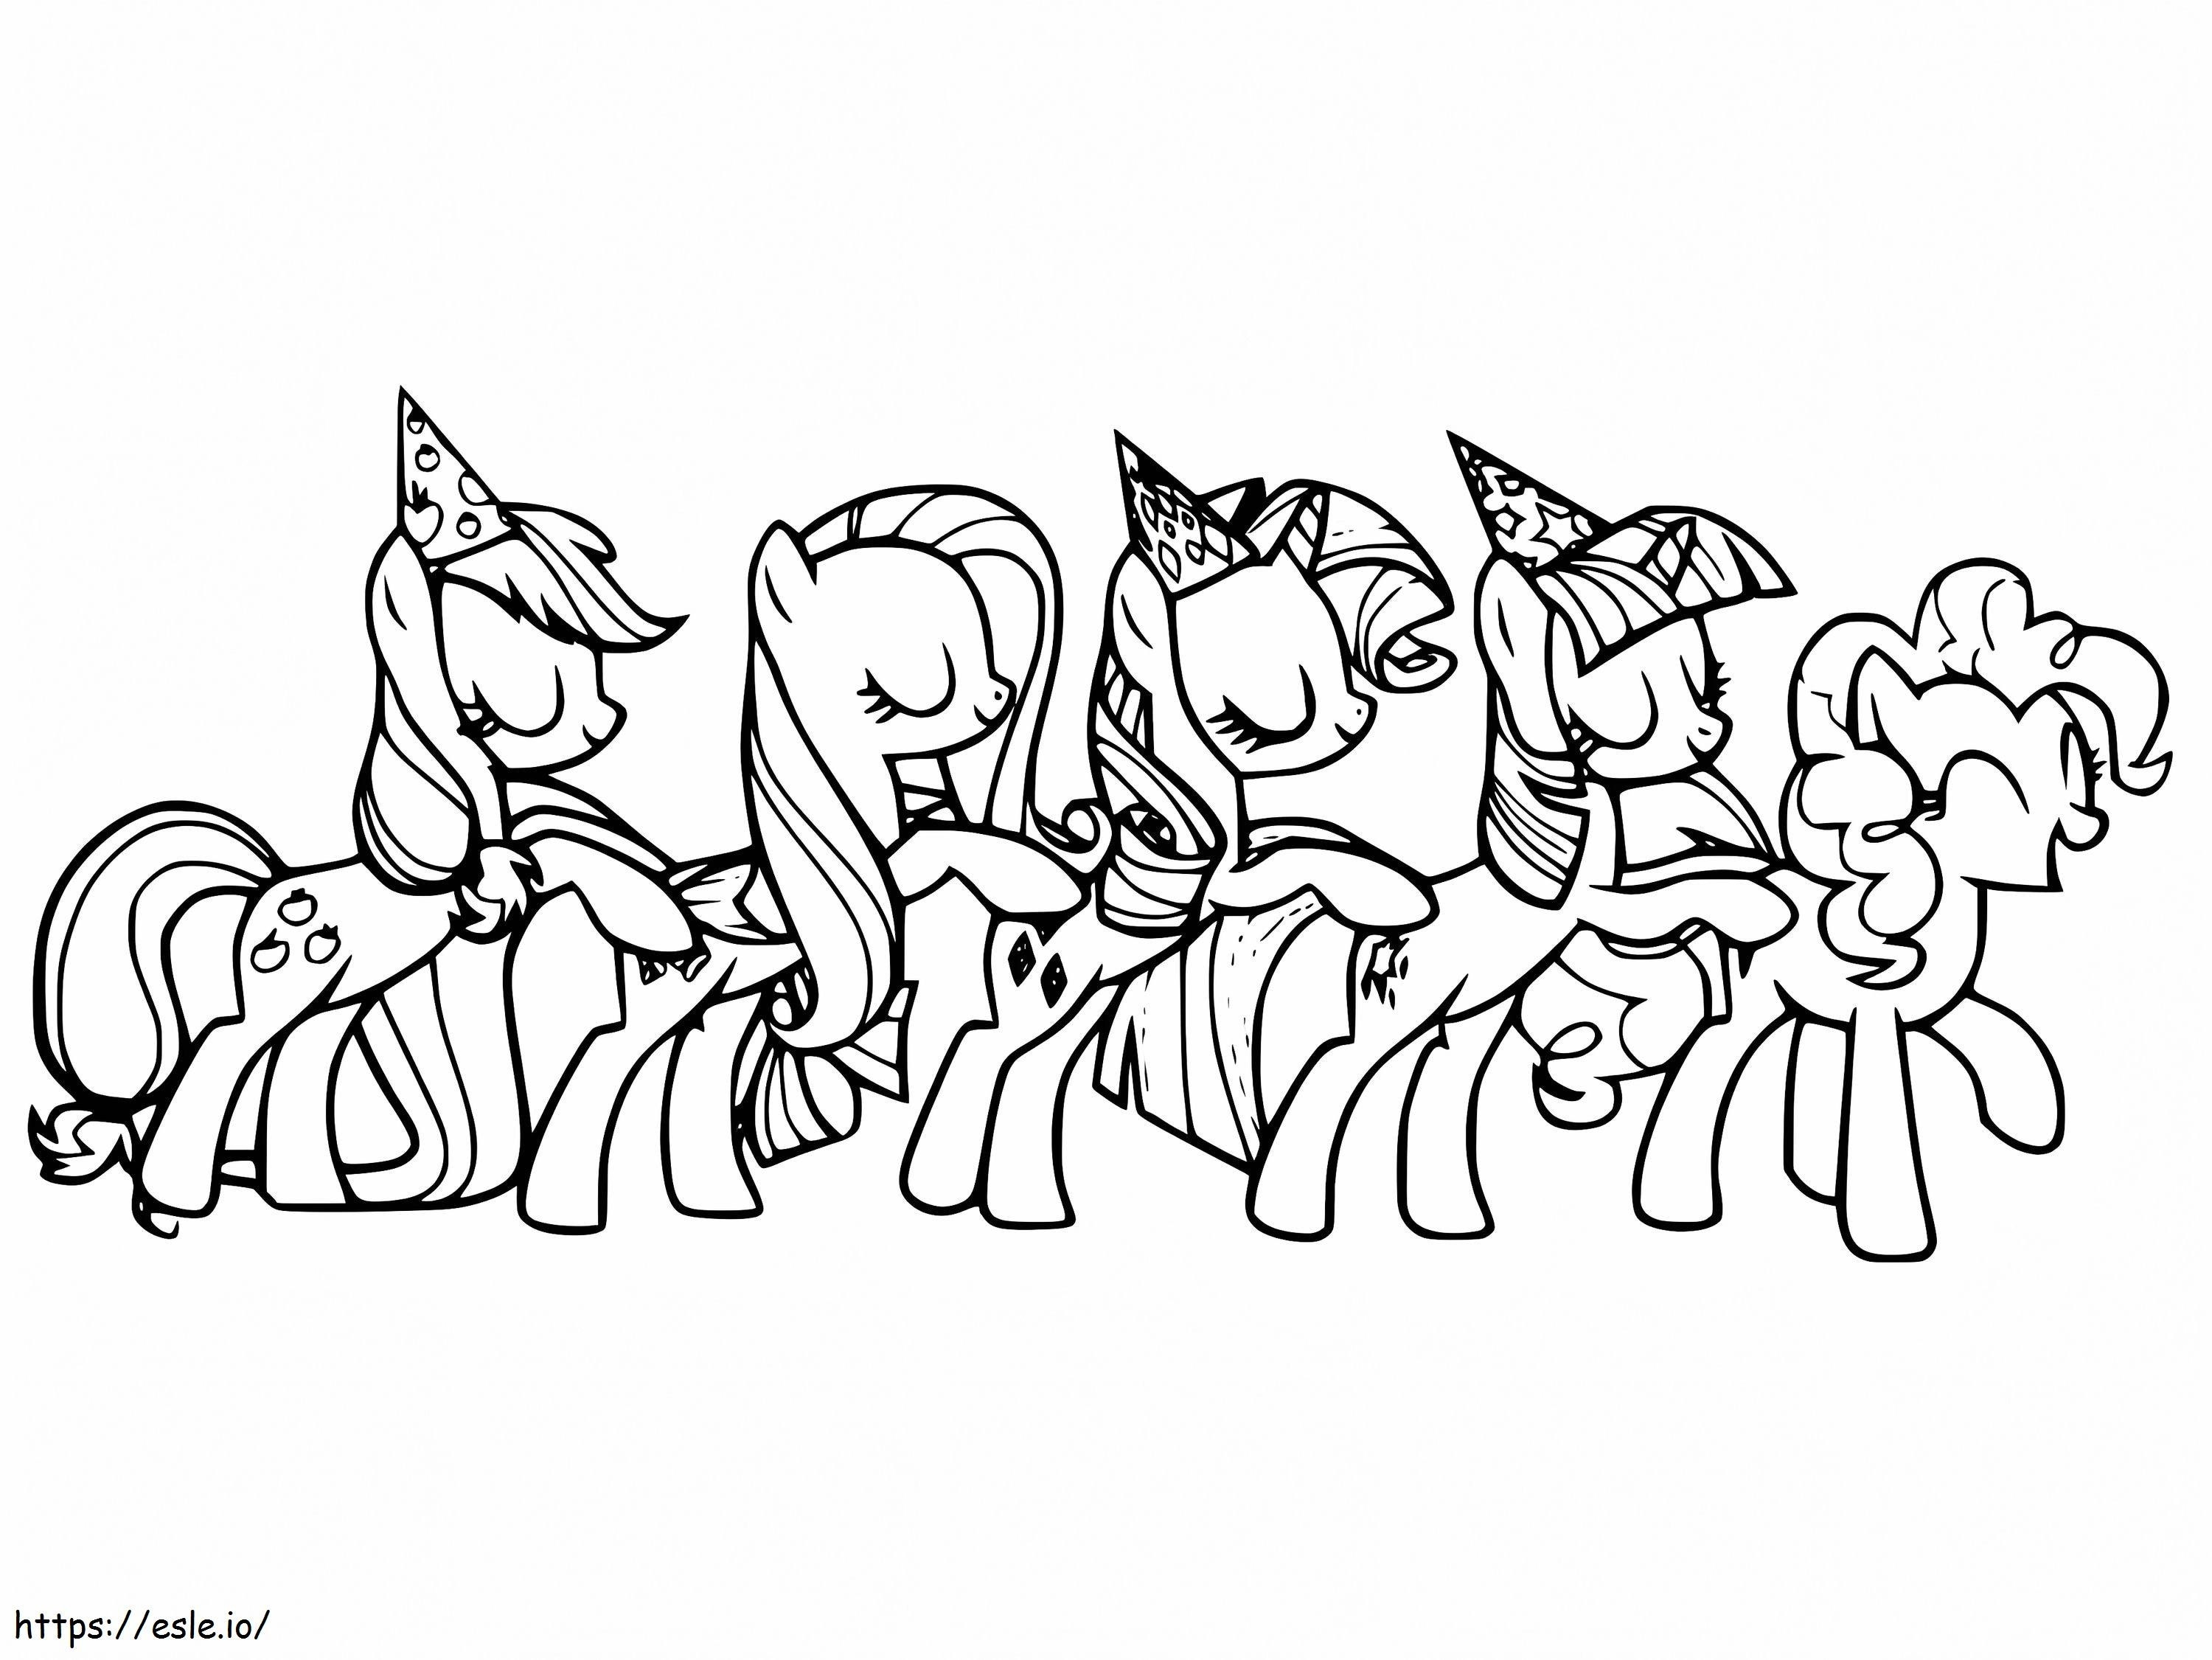 Adorable My Little Pony coloring page